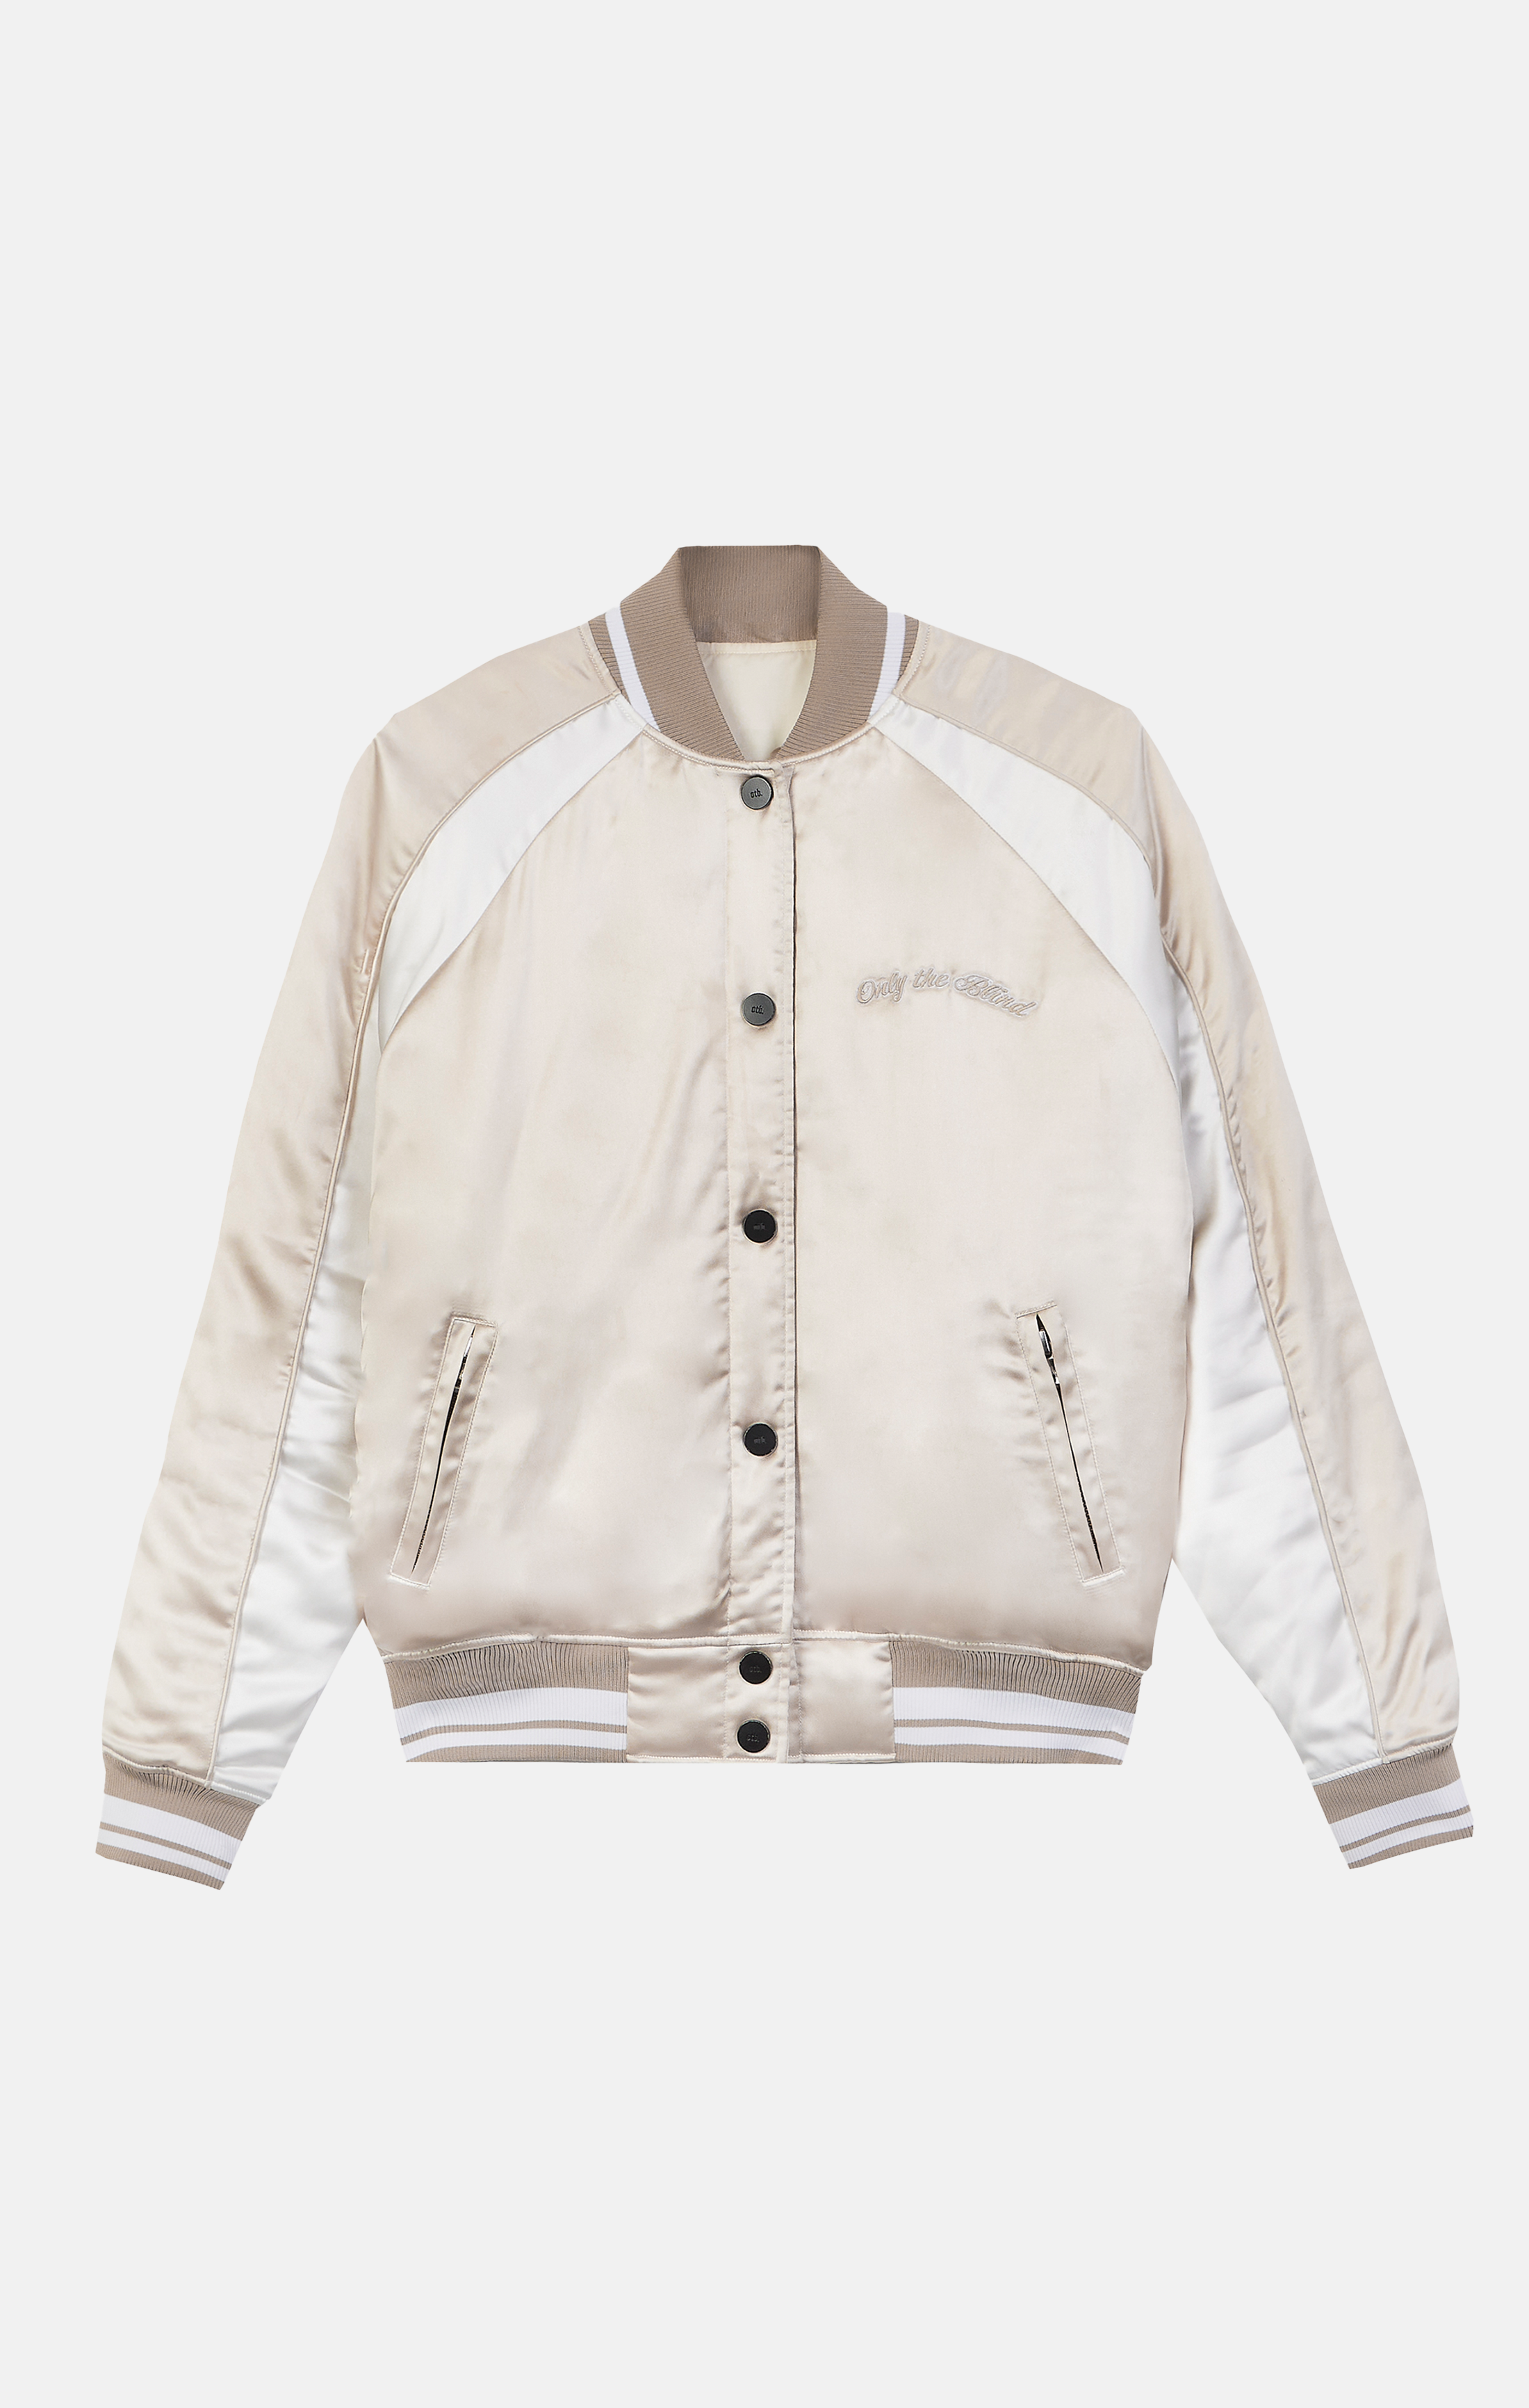 ONLY THE BLIND - GOLD DAWN CRANE BOMBER